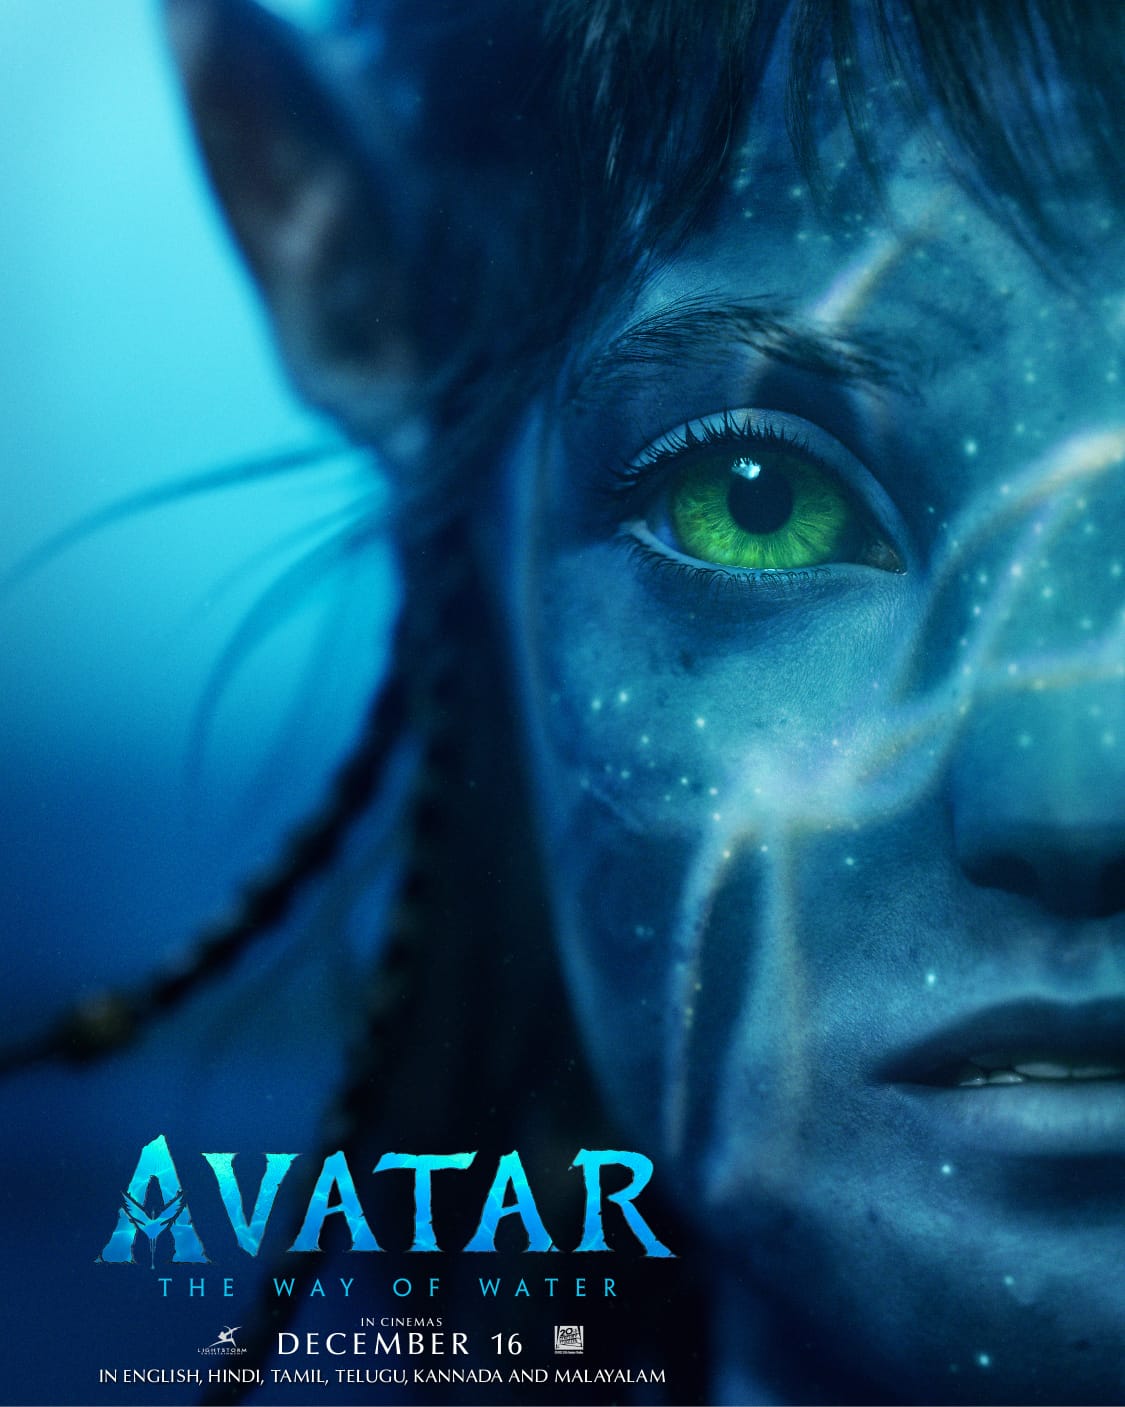  Avatar The Way of Water teaser trailer amazes all 